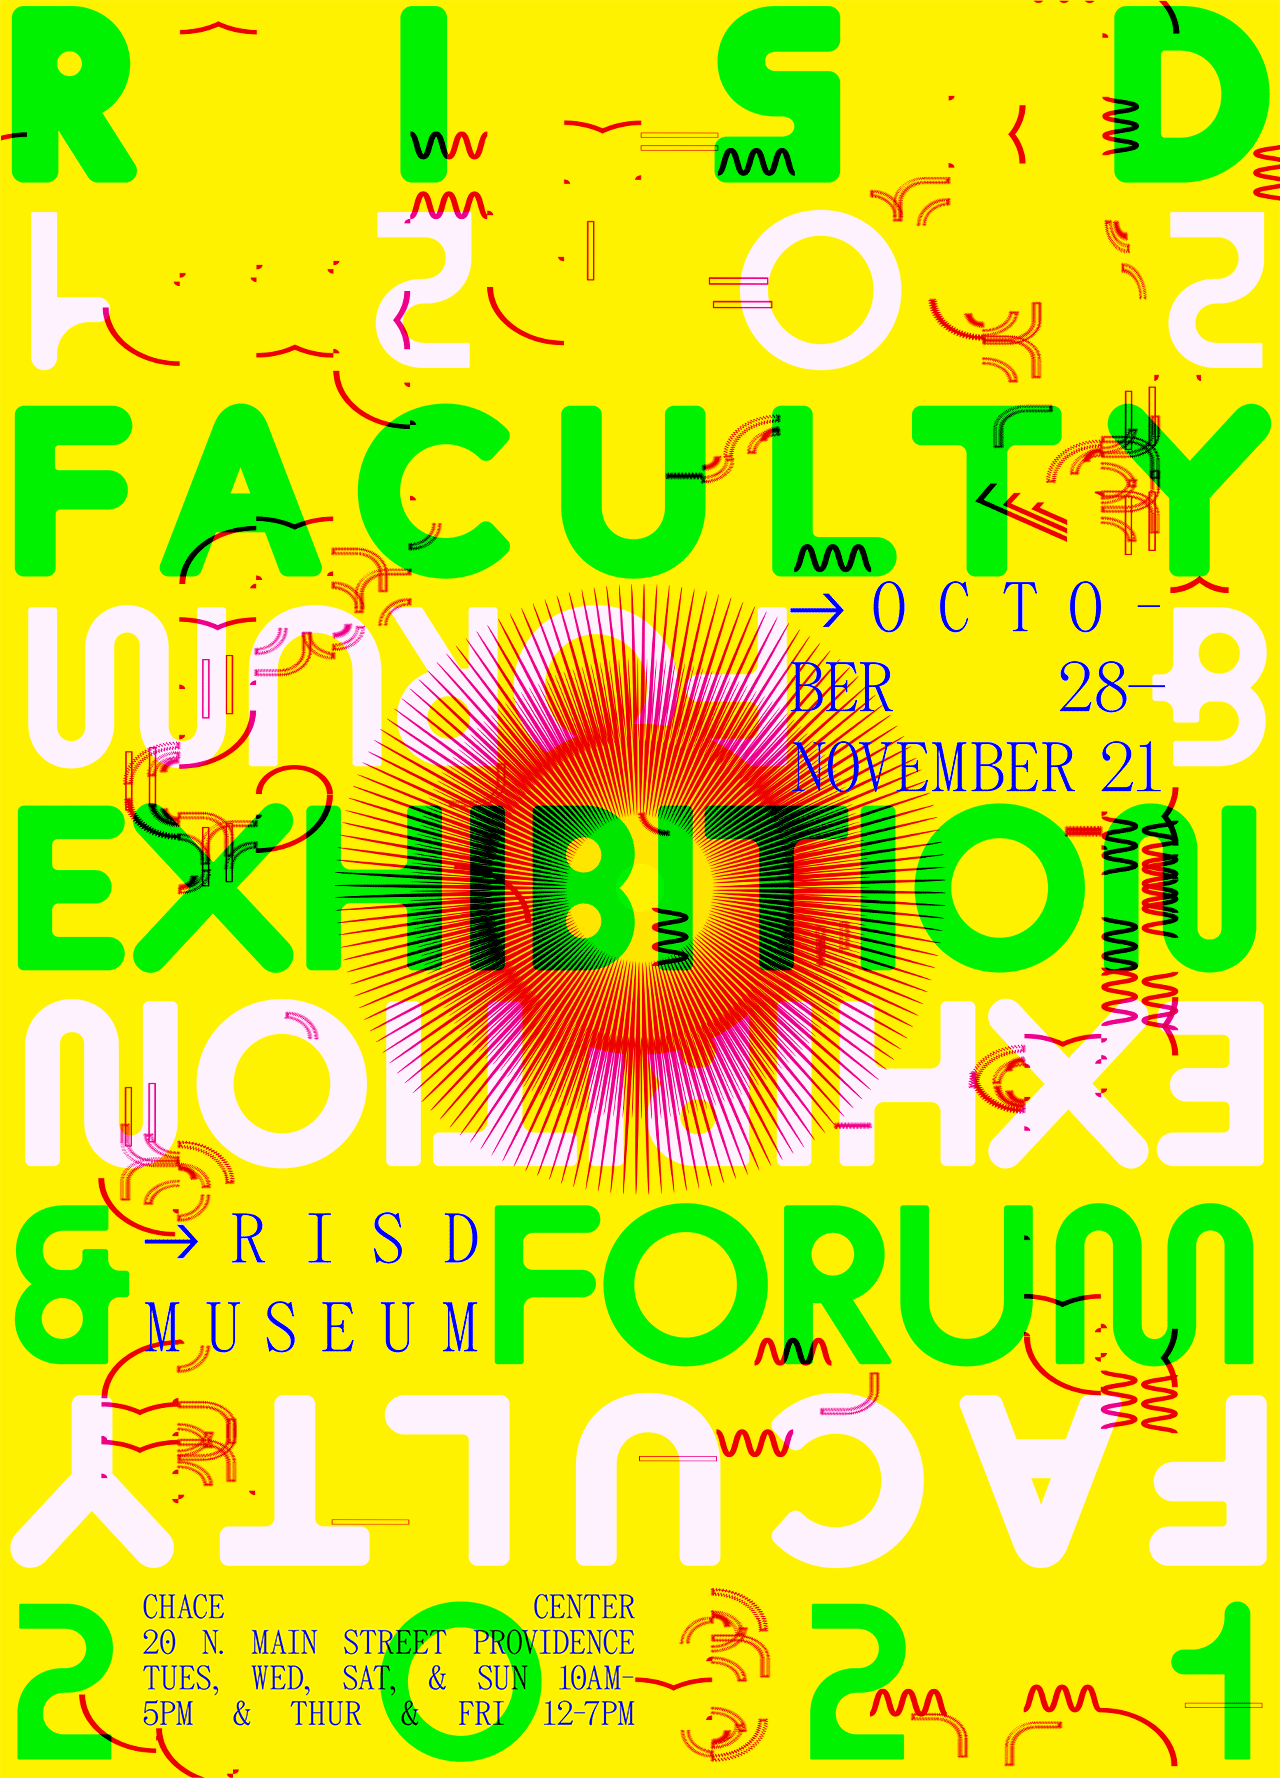 GIF image: Bright yellow background with red center medallion and decorative line work. Flashing green and black text says: "RISD Faculty Exhibition and Forum 2021. October 28-November 21. Chace Center, 20 N. Main Street, Providence. Tuesday, Wednesday, Saturday, and Sunday, 10am-5pm. Thursday and Friday, 12-7pm." Some text is repeated upside-down in white.   